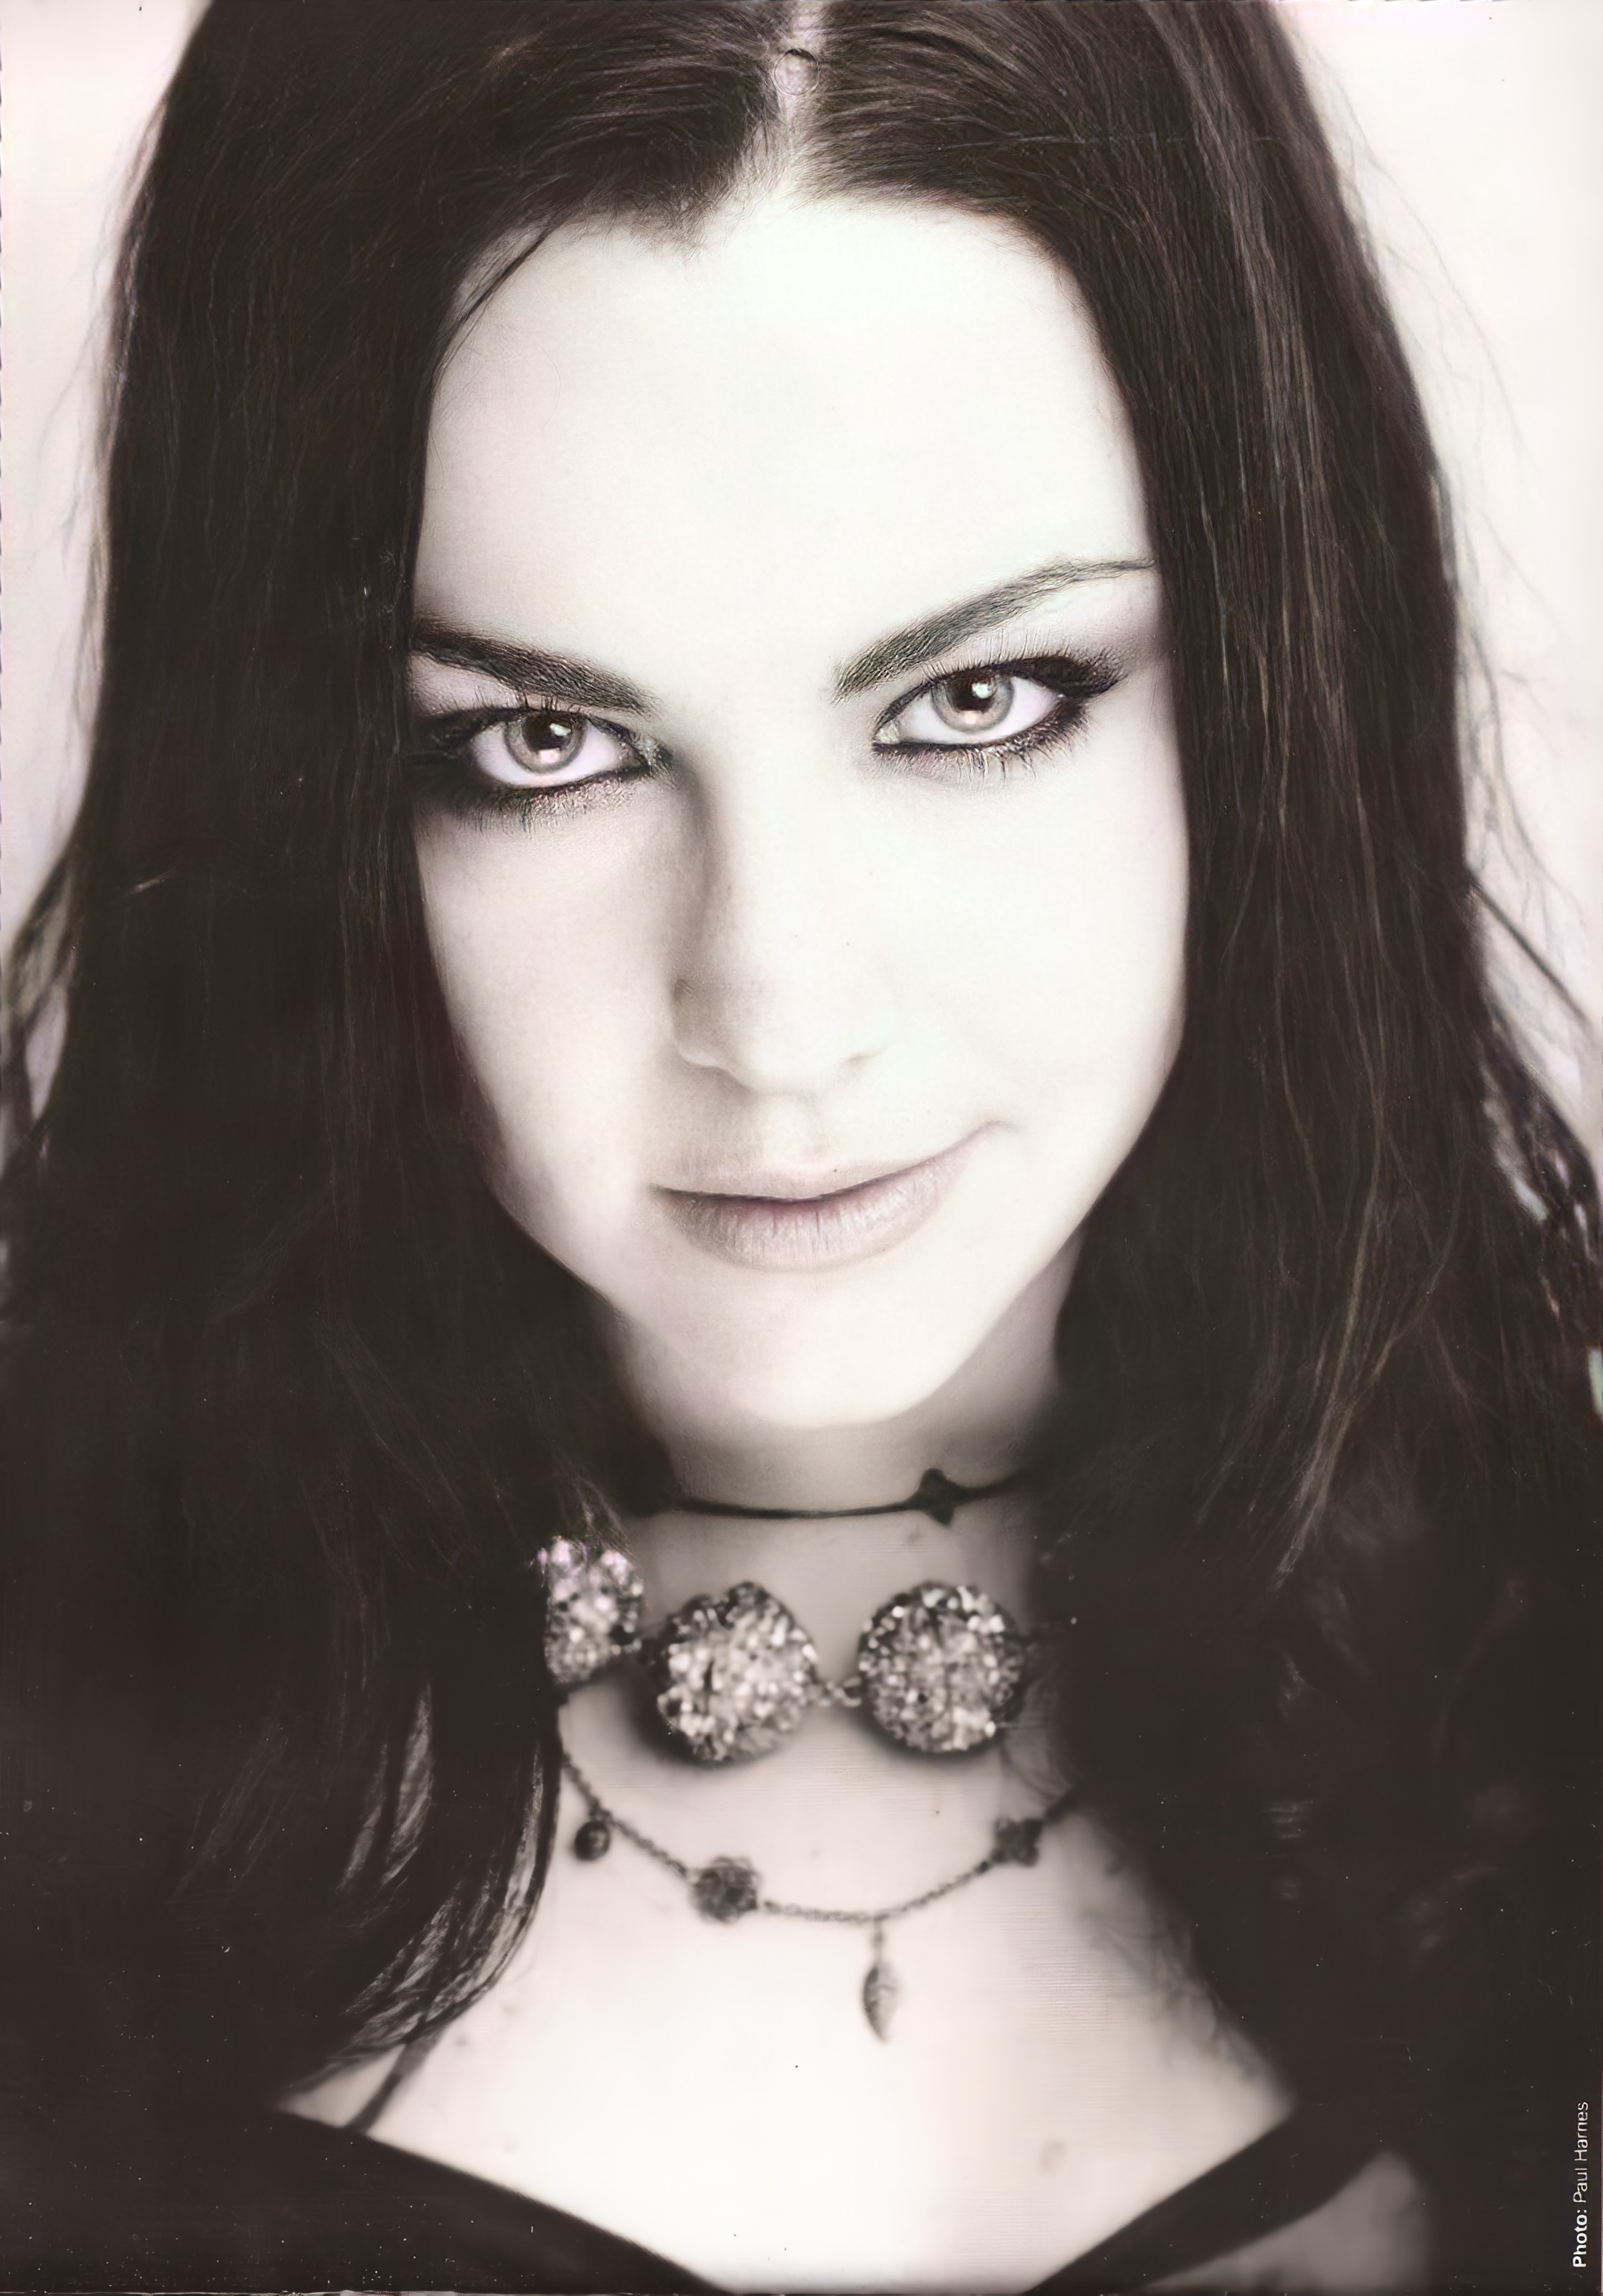 2234x3200
Keywords: amy lee;hq;photoshoot;the open door;2006;sesion